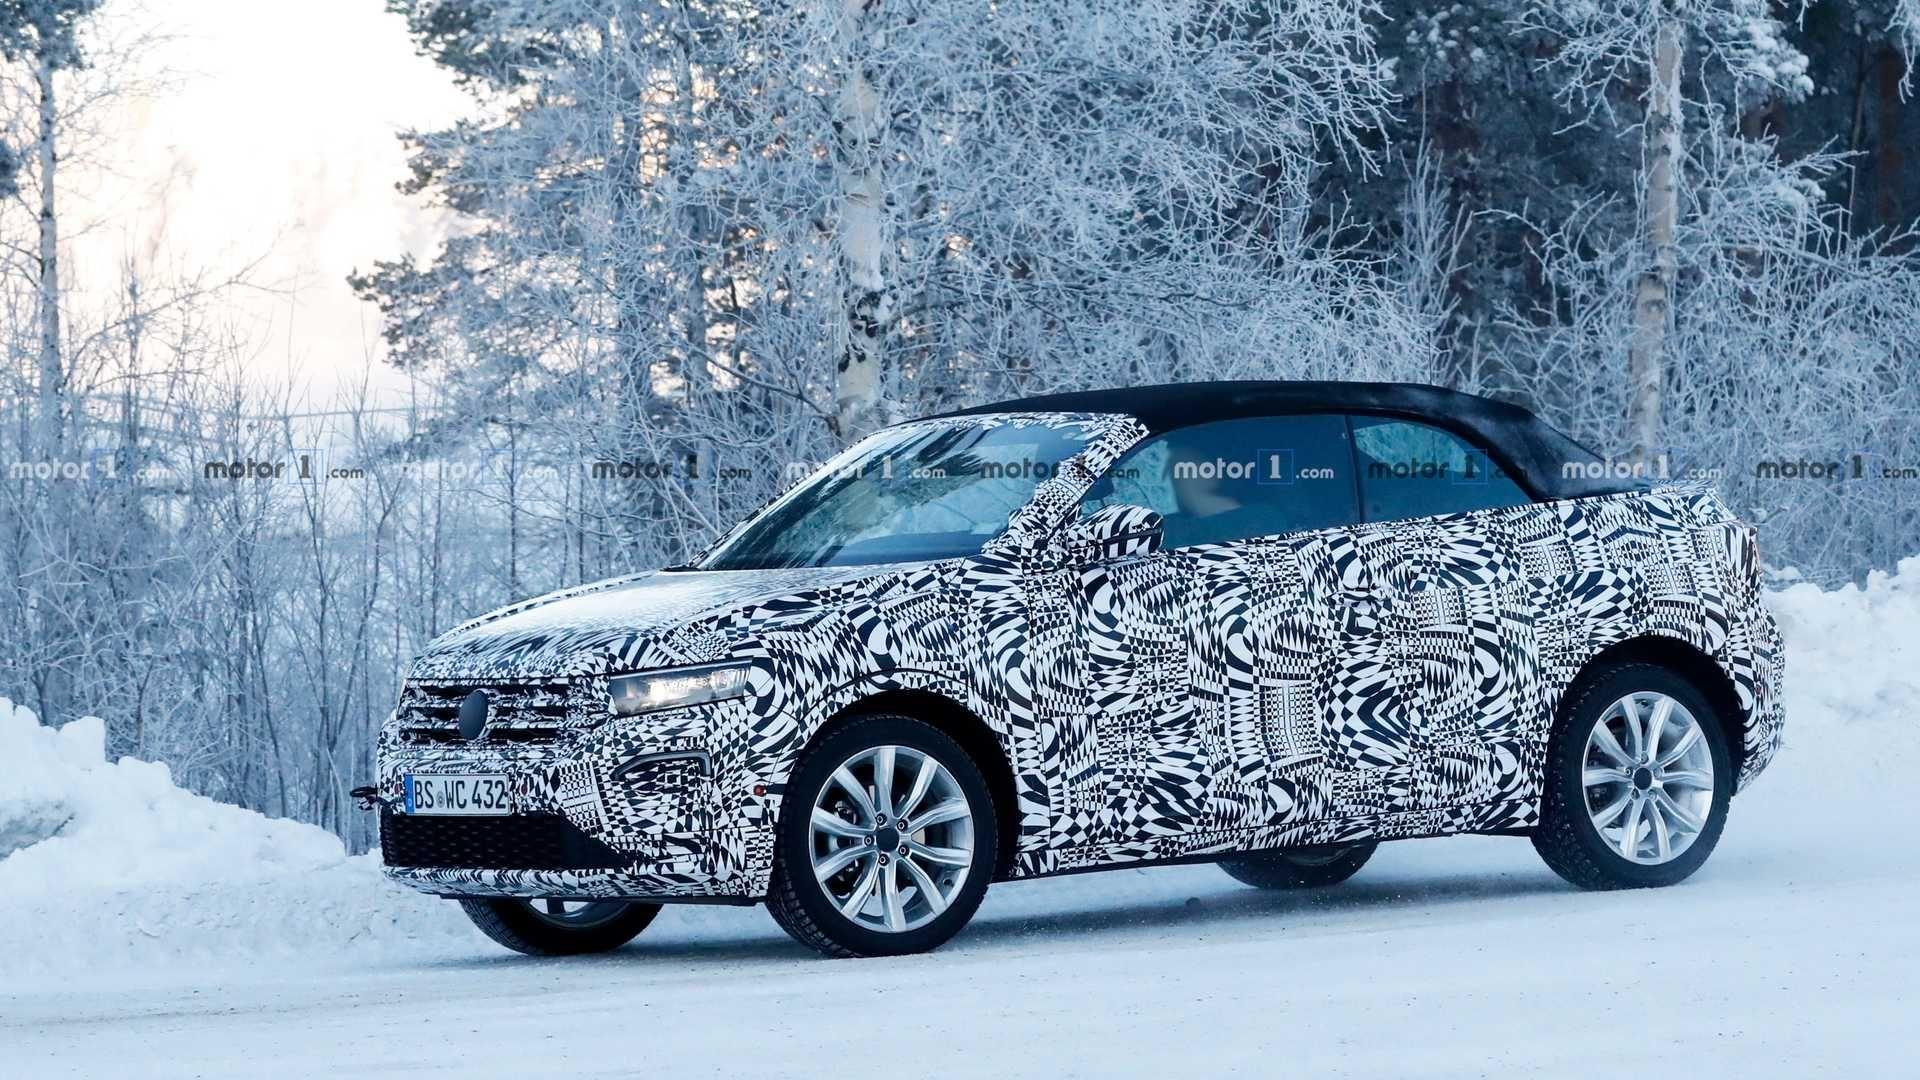 VW T Roc Convertible Spied Looking Very Cold In Sweden